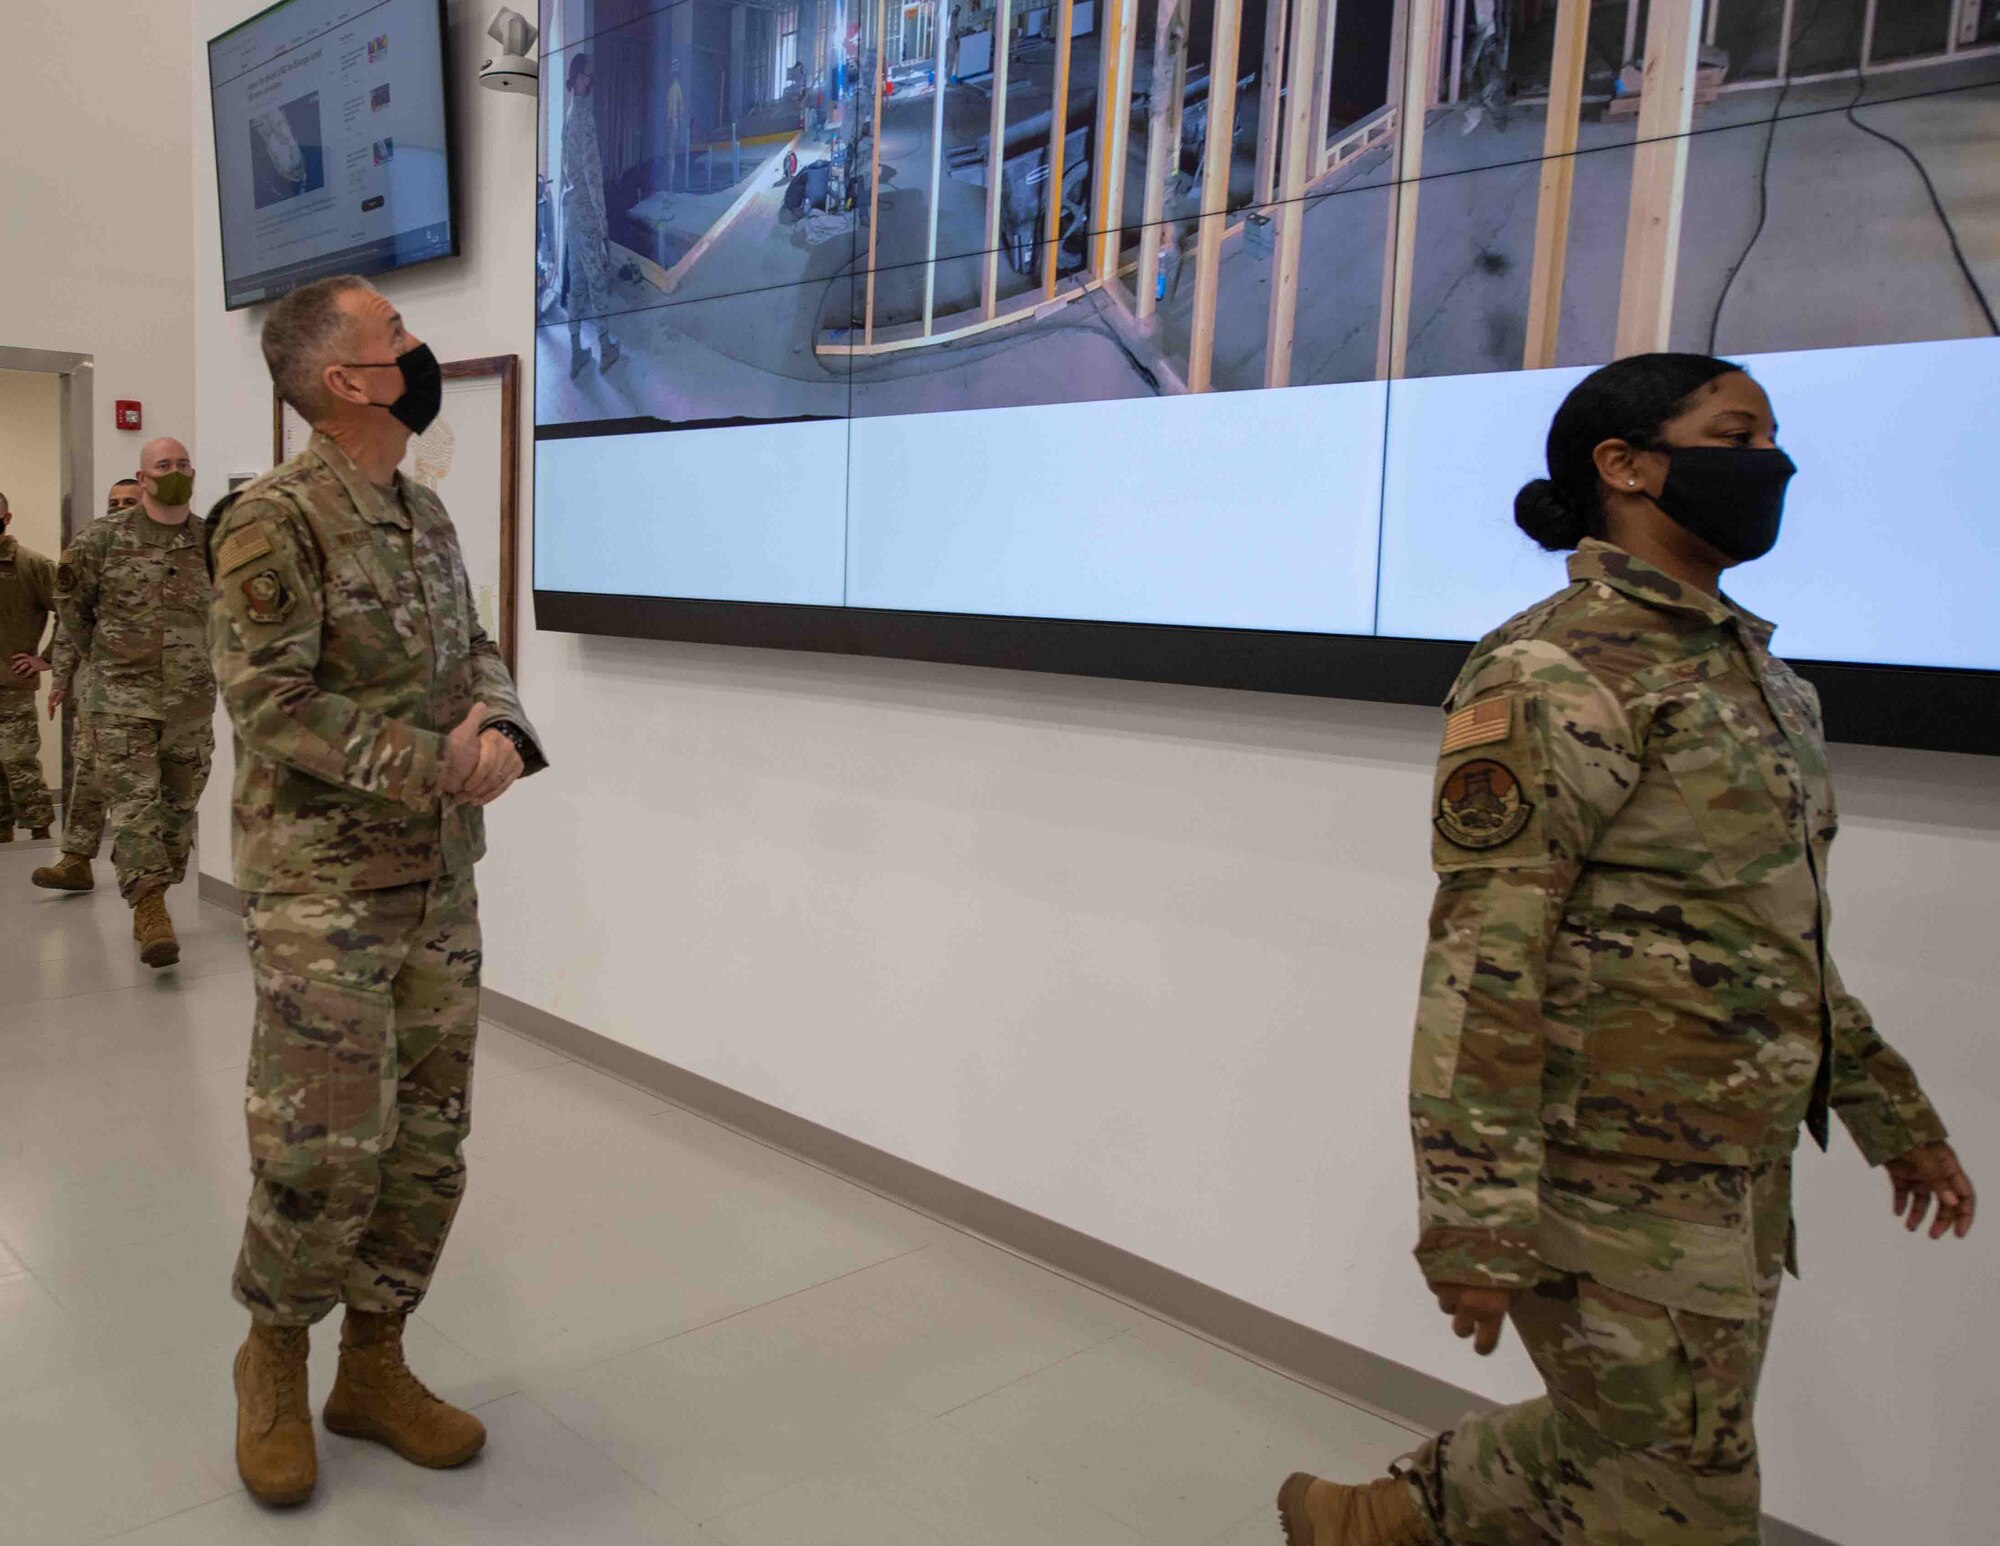 Maj. Gen. Tom Wilcox, Air Force Installation and Mission Support Center commander, looks at images of Yokota’s Emergency Operations Center renovation during a site visit at Yokota Air Base, Japan, Feb. 9, 2022.